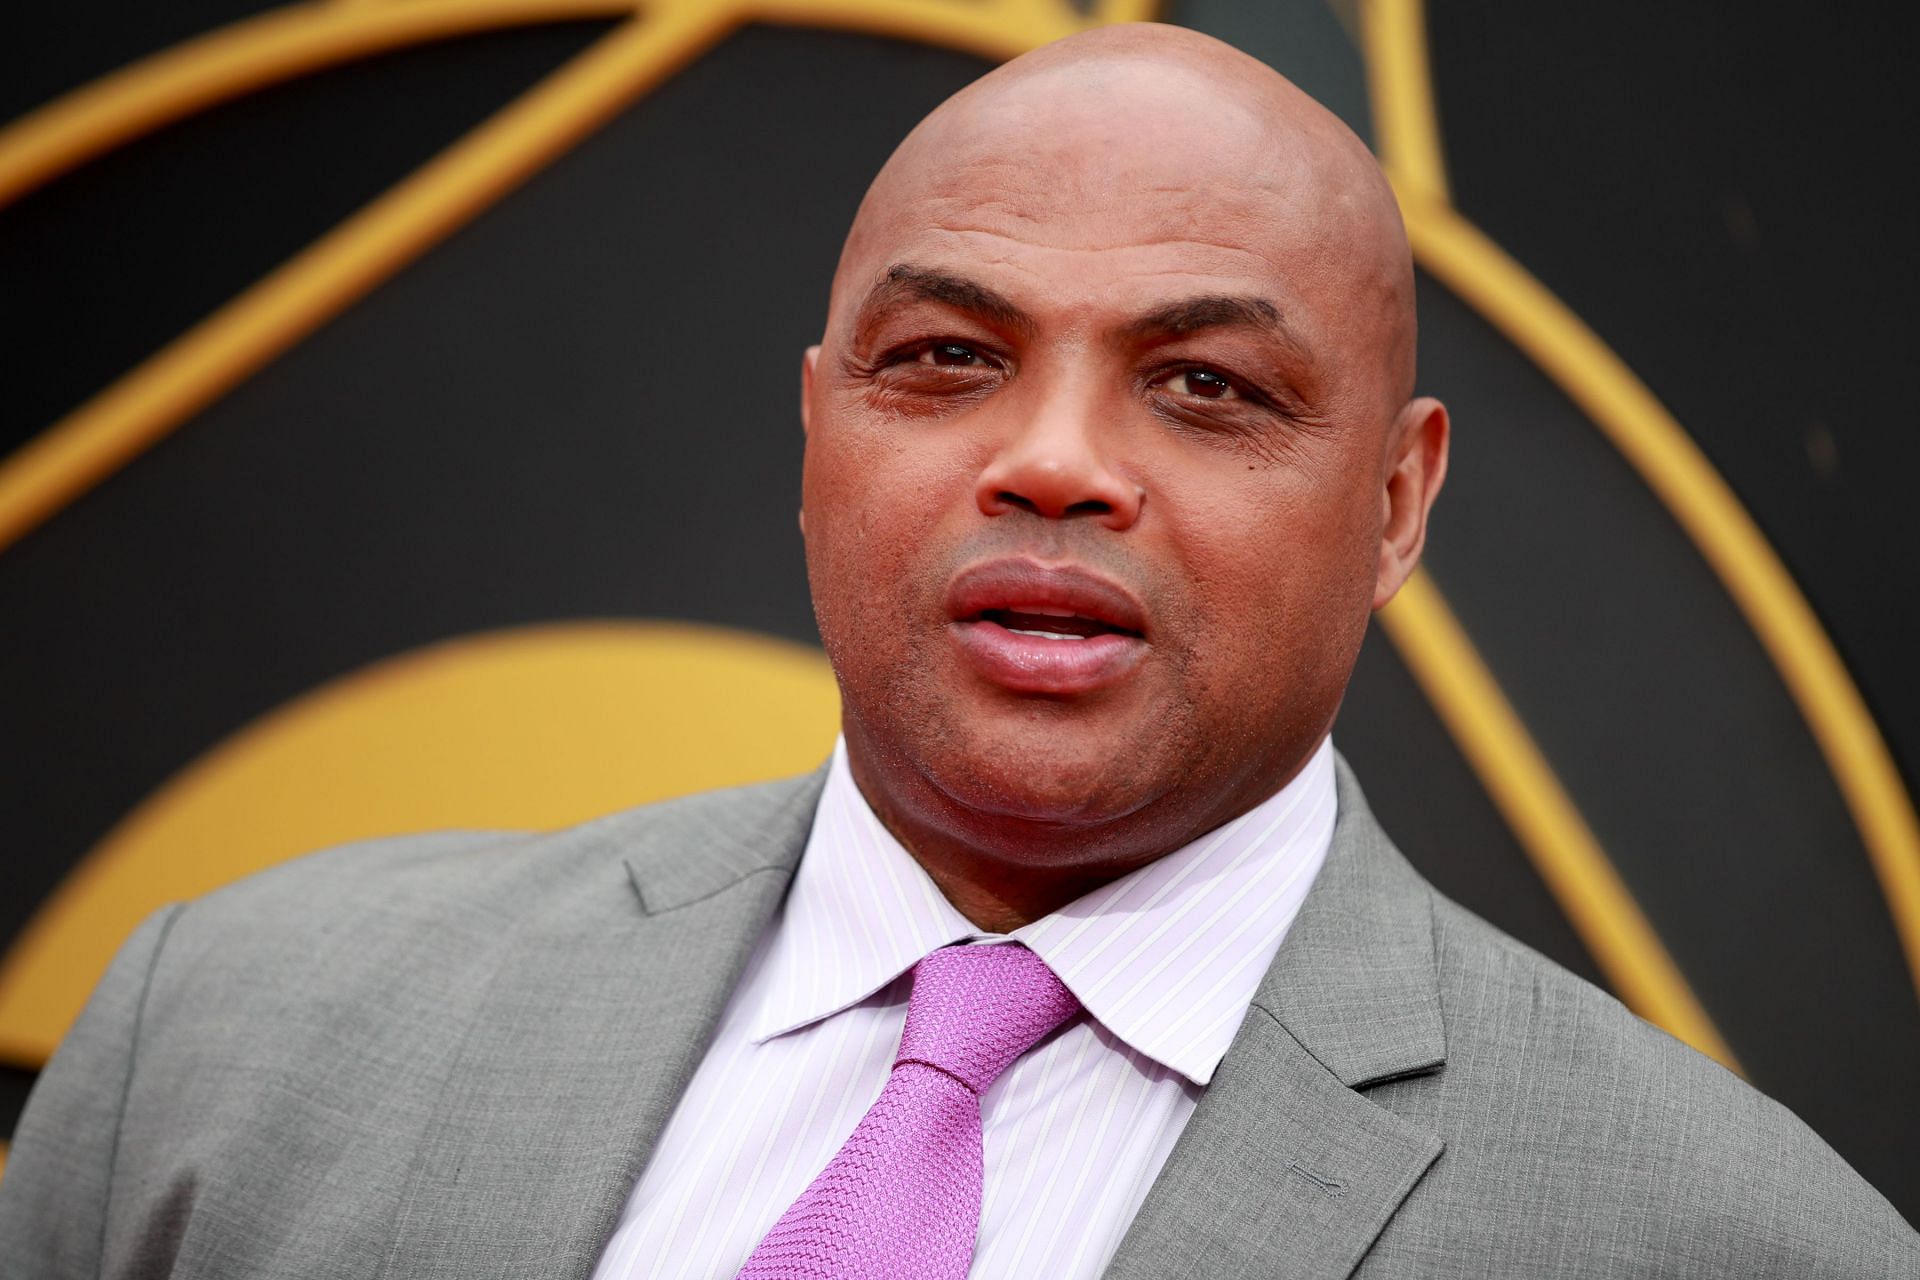 NBA analyst and Hall of Fame forward Charles Barkley